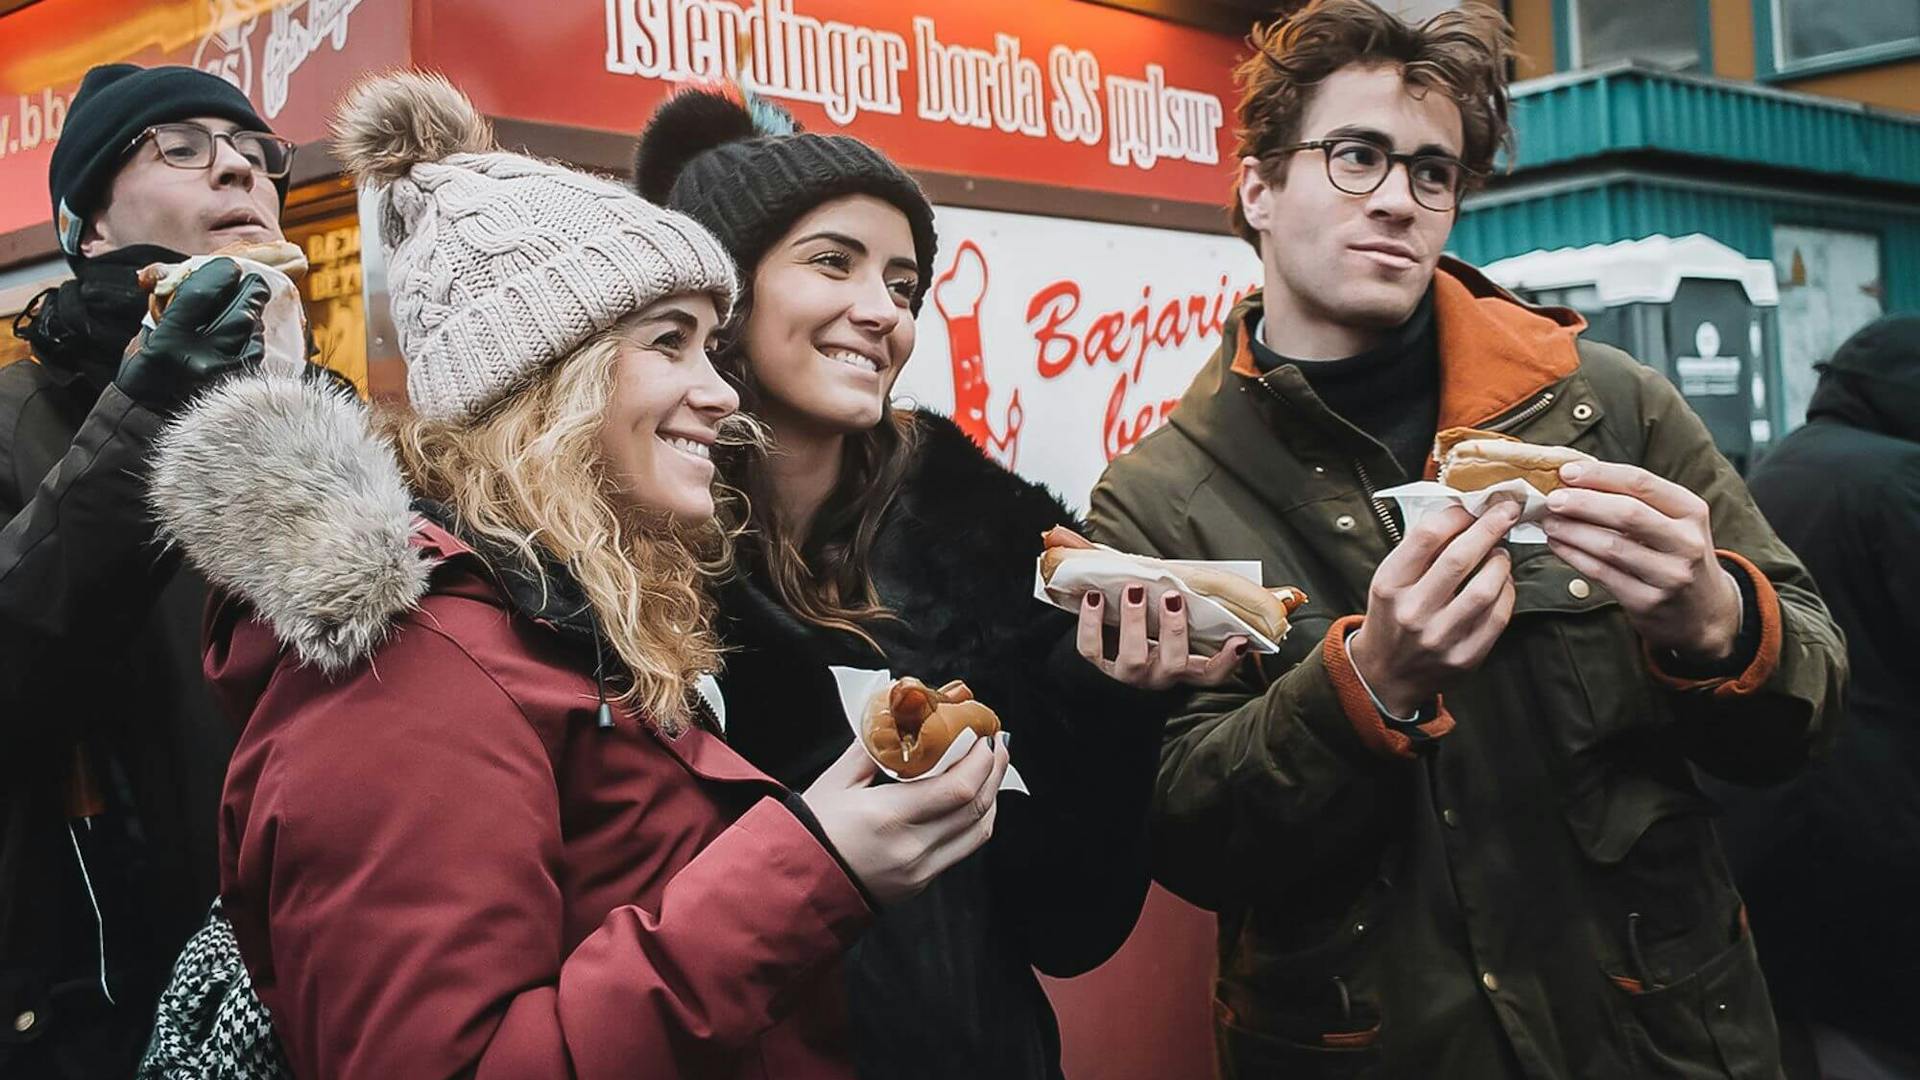 Happy people eating Icelandic Hot dogs